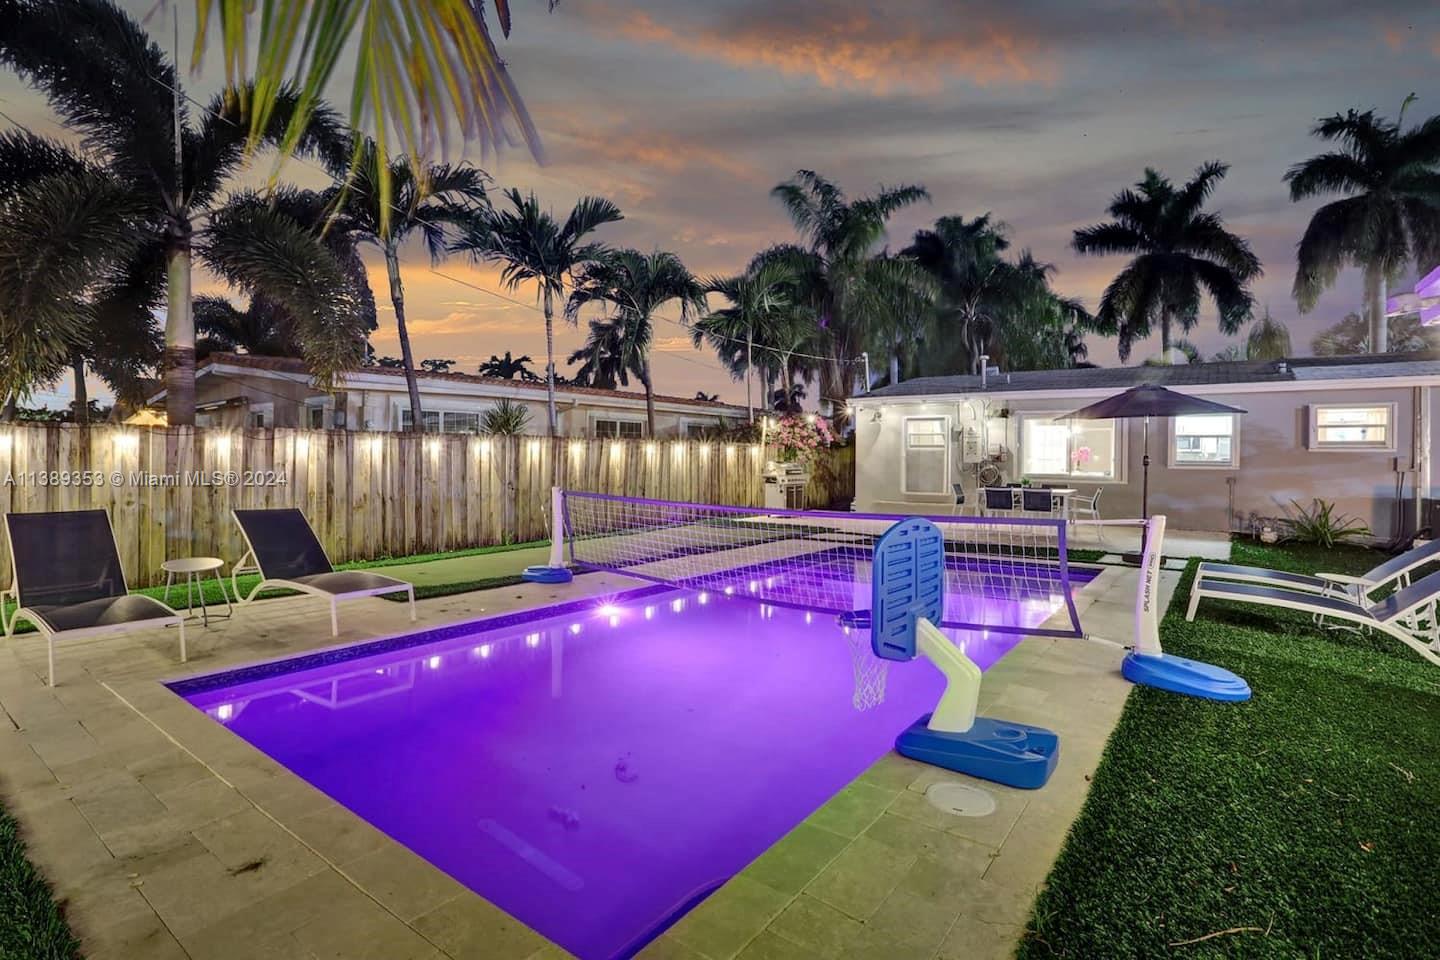 Brand new roof installed.  Unwind in this sunny 3 Bedroom 2 Bathroom house, 5 mins away from the vibrant Hollywood Beach. Walk to top restaurants, shops, attractions, and landmarks. The lively backyard with a heated pool offers various comfortable relaxation and entertainment amenities.